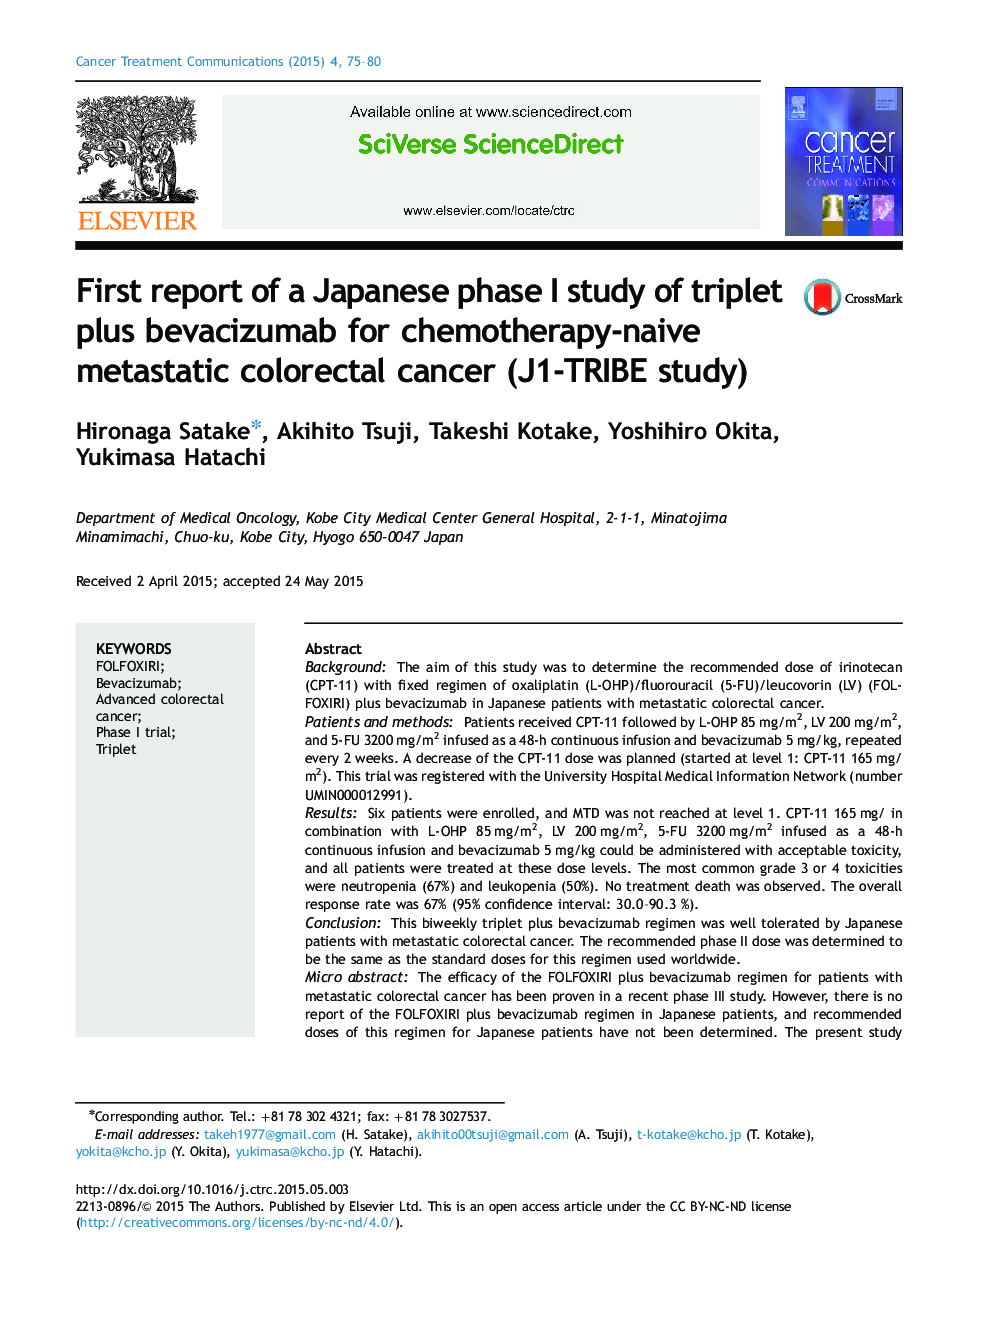 First report of a Japanese phase I study of triplet plus bevacizumab for chemotherapy-naive metastatic colorectal cancer (J1-TRIBE study)